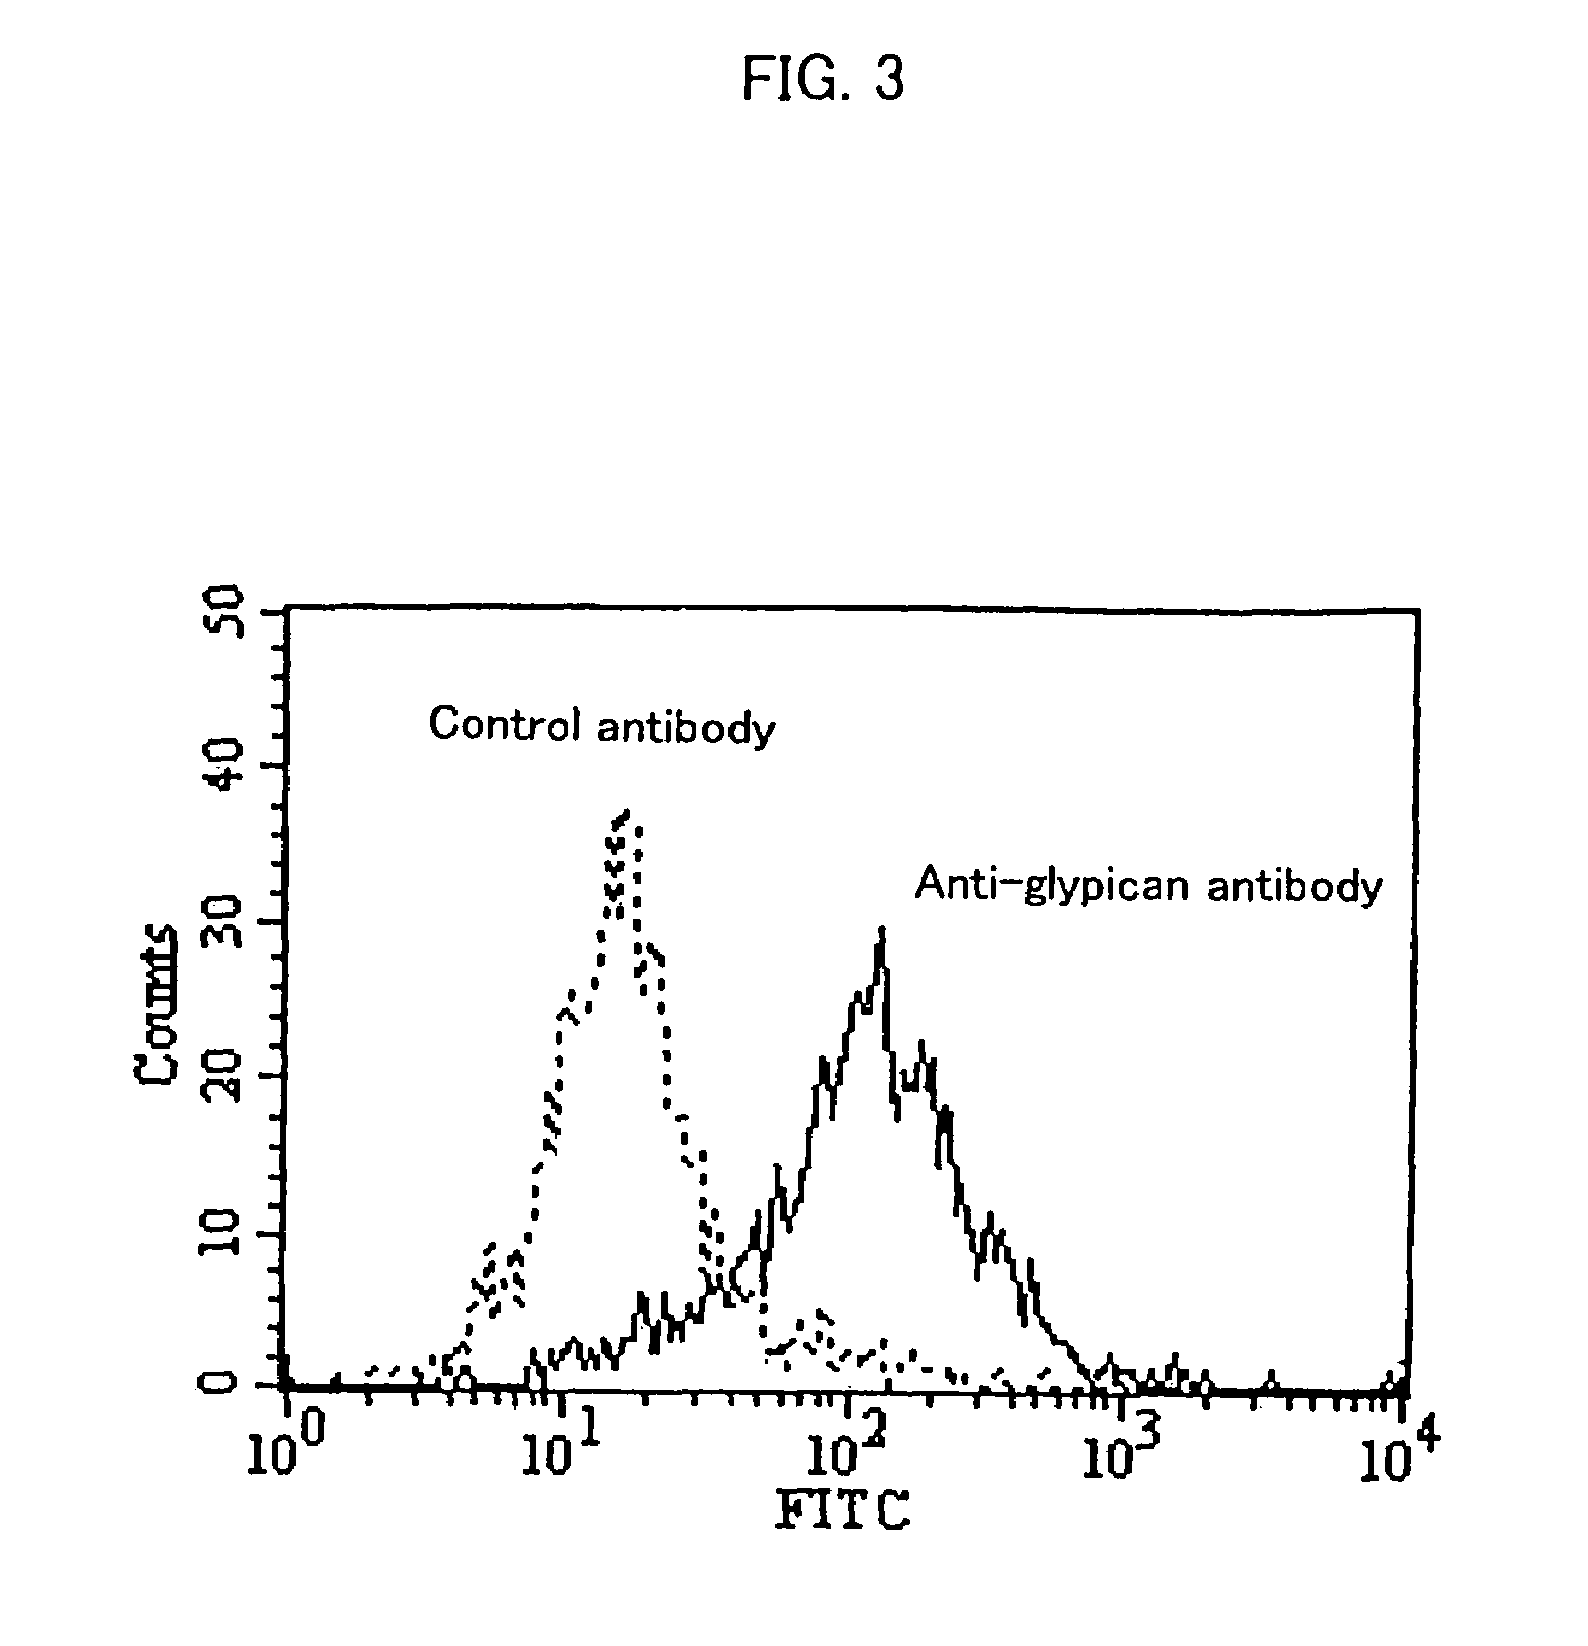 Cell growth inhibitors containing anti-glypican 3 antibody